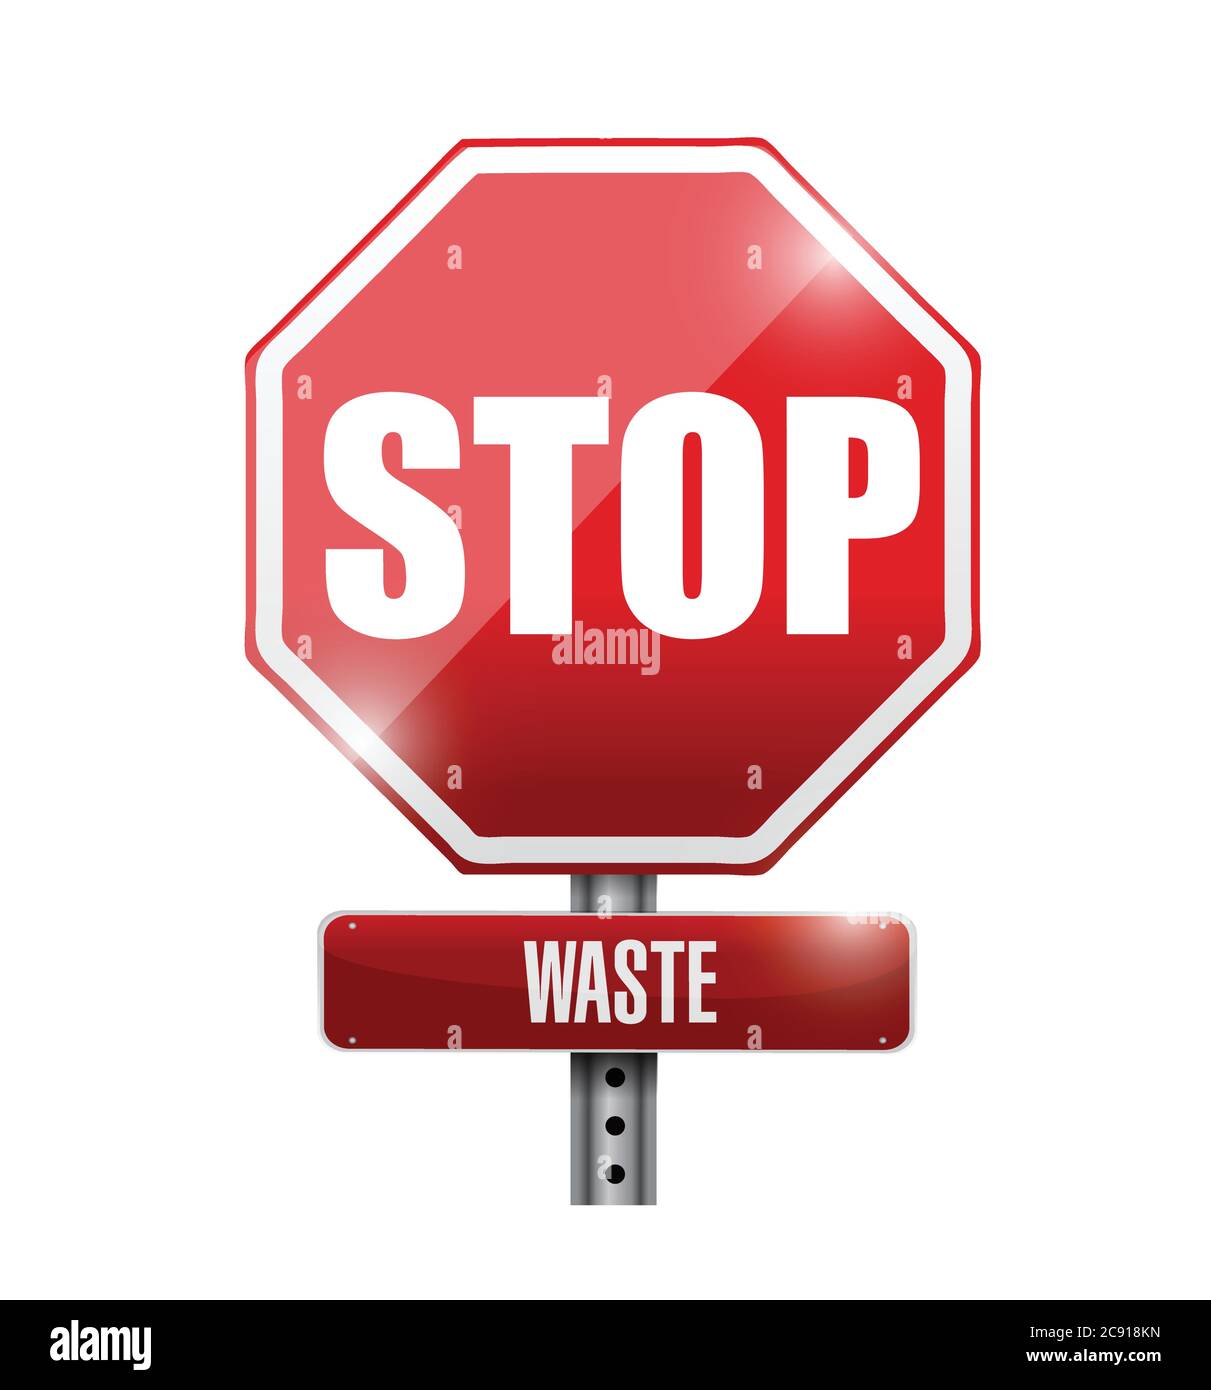 Stop waste street sign illustration design over a white background Stock Vector